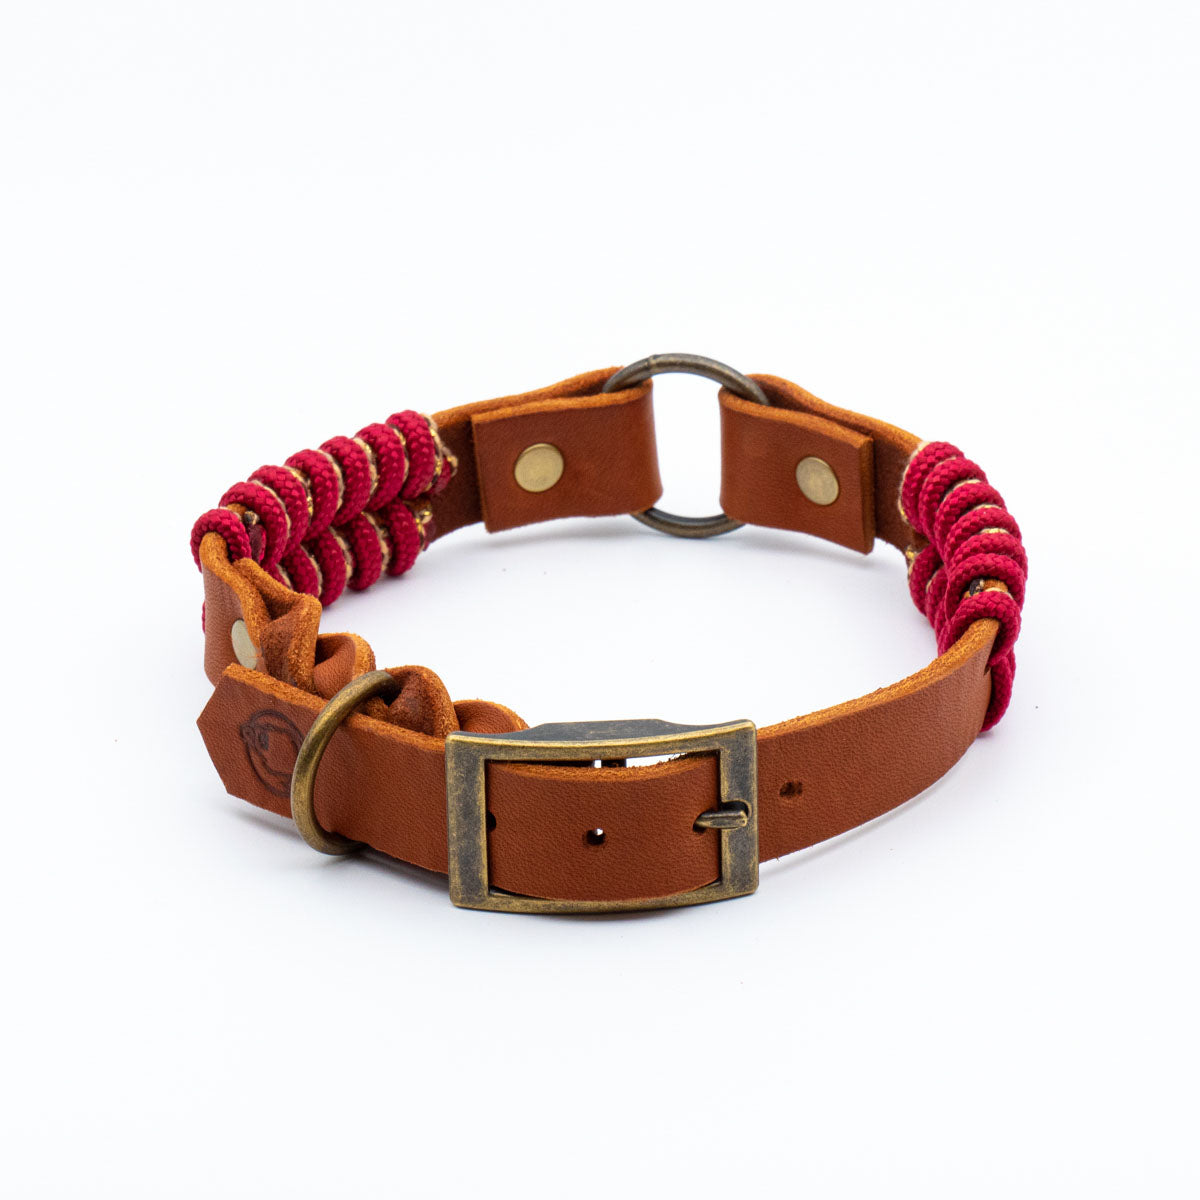 Leather collar - Berry